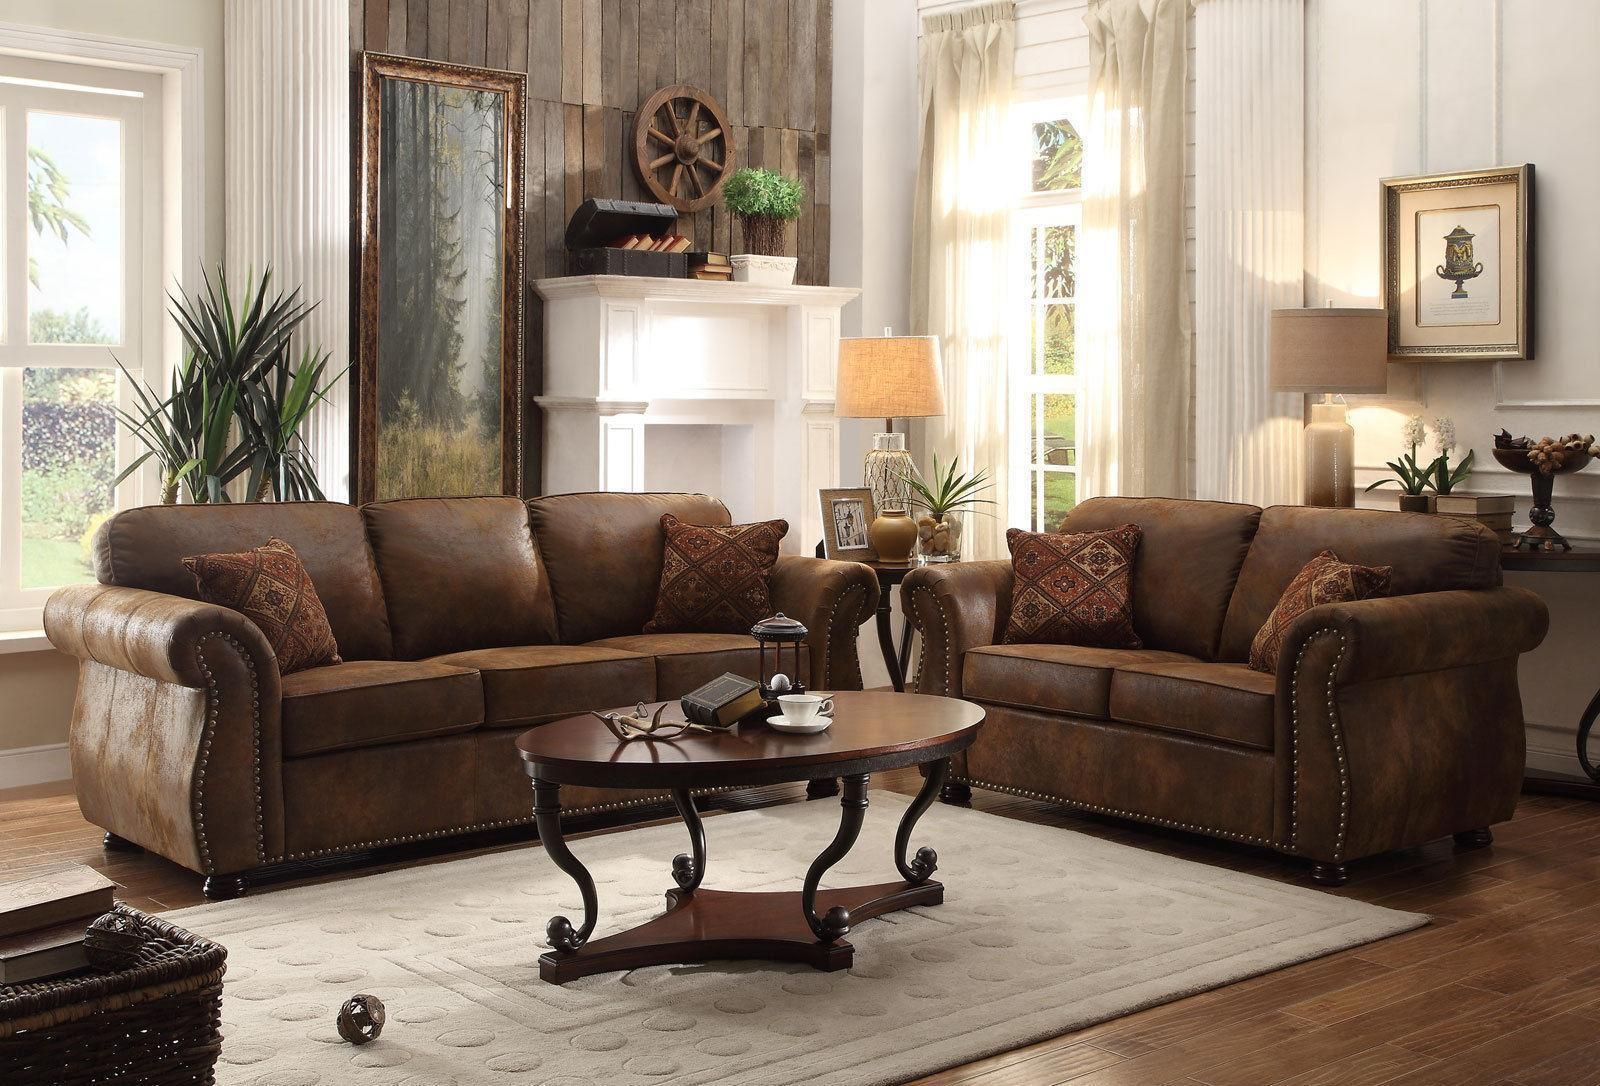 Westwood Rustic Brown Living Room Furniture Faux Leather Sofa Couch Pertaining To Faux Leather Sofas In Chocolate Brown (View 10 of 20)